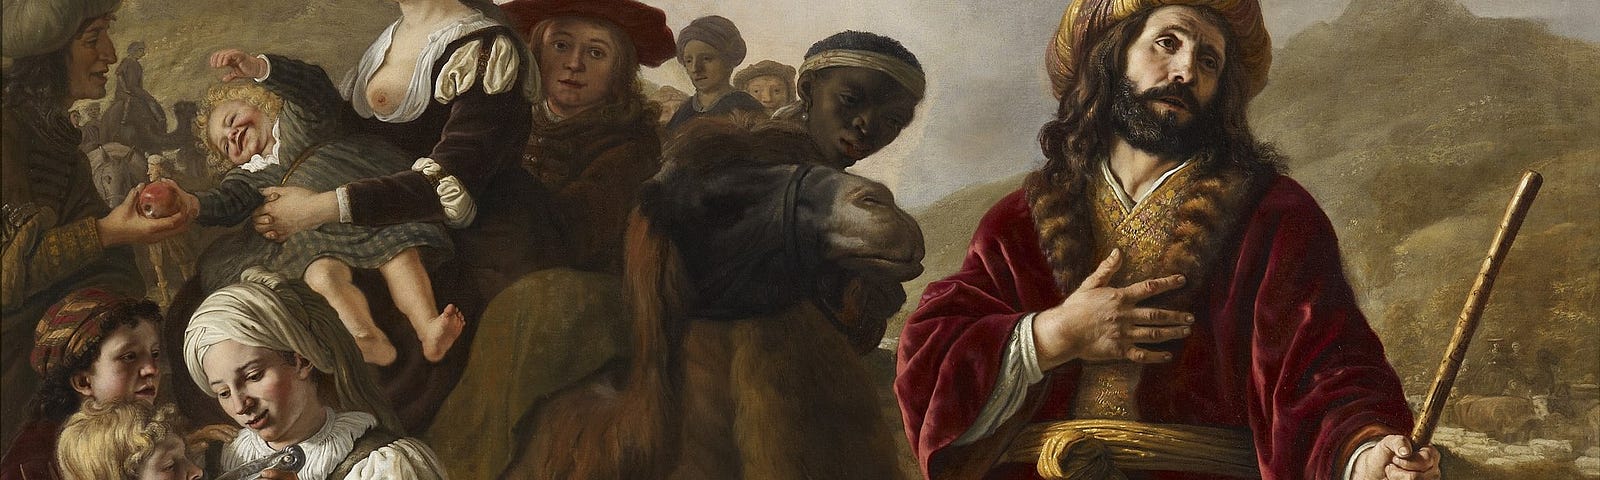 Jacob, a Biblical figure dressed in a red robe holding a gold staff, is on one knee asking his brother, Esau, for forgiveness. He is joined by his family and household, all dressed in medieval-style clothing.